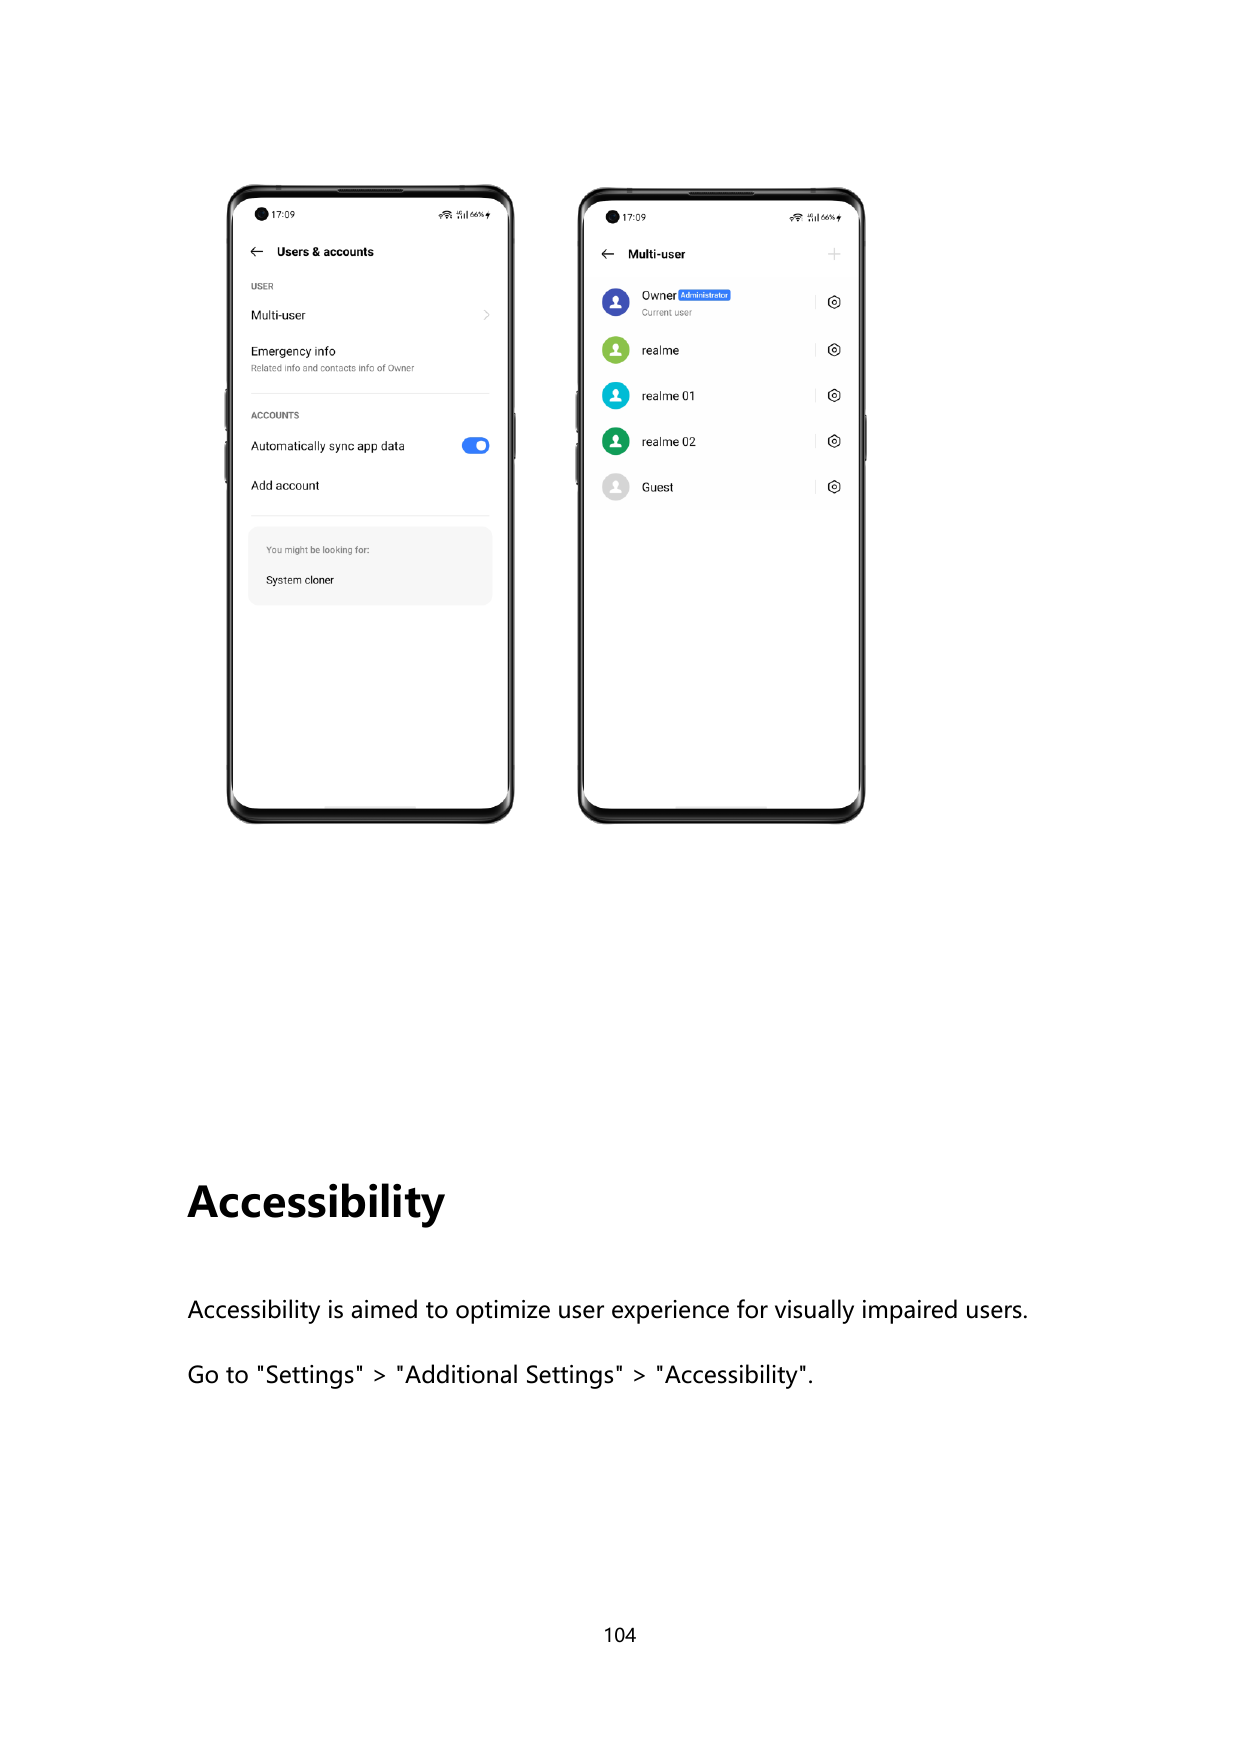 AccessibilityAccessibility is aimed to optimize user experience for visually impaired users.Go to "Settings" > "Additional Setti